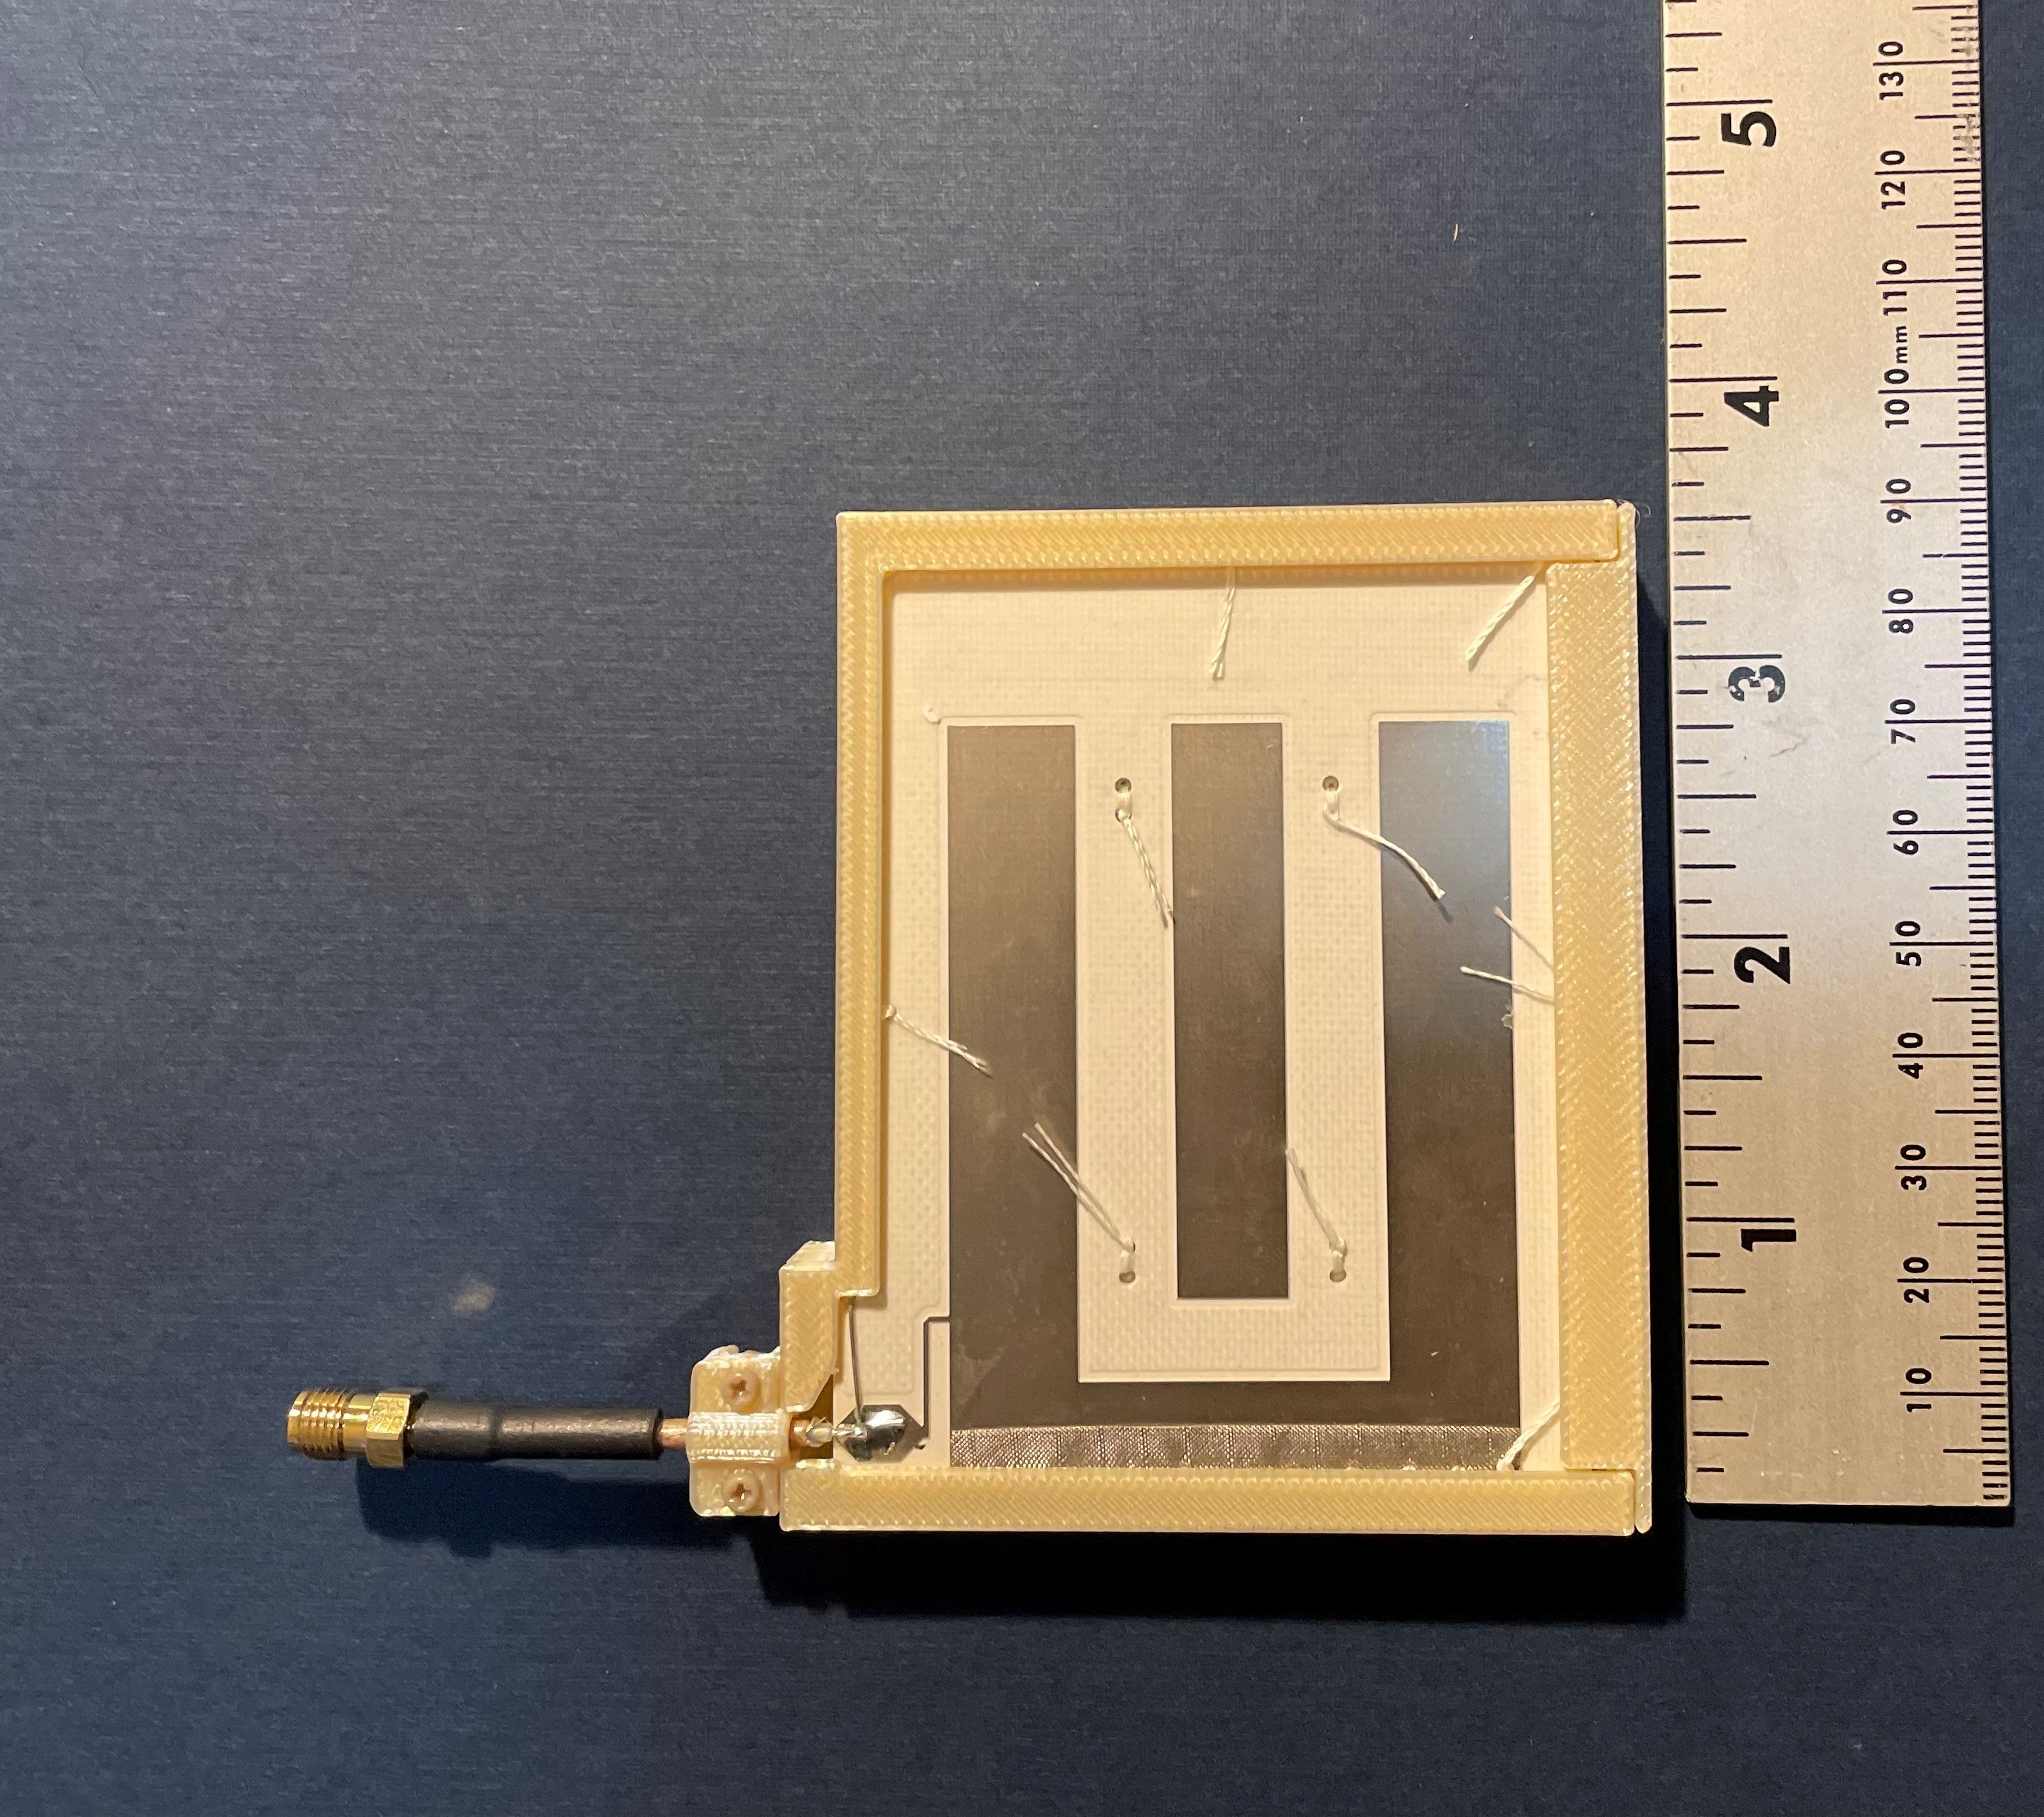 Shown: NASA's quarter-wavelength crossed-slot antenna offers a form factor that is much smaller than other half-wavelength RFID antennas that provide similar functionality.